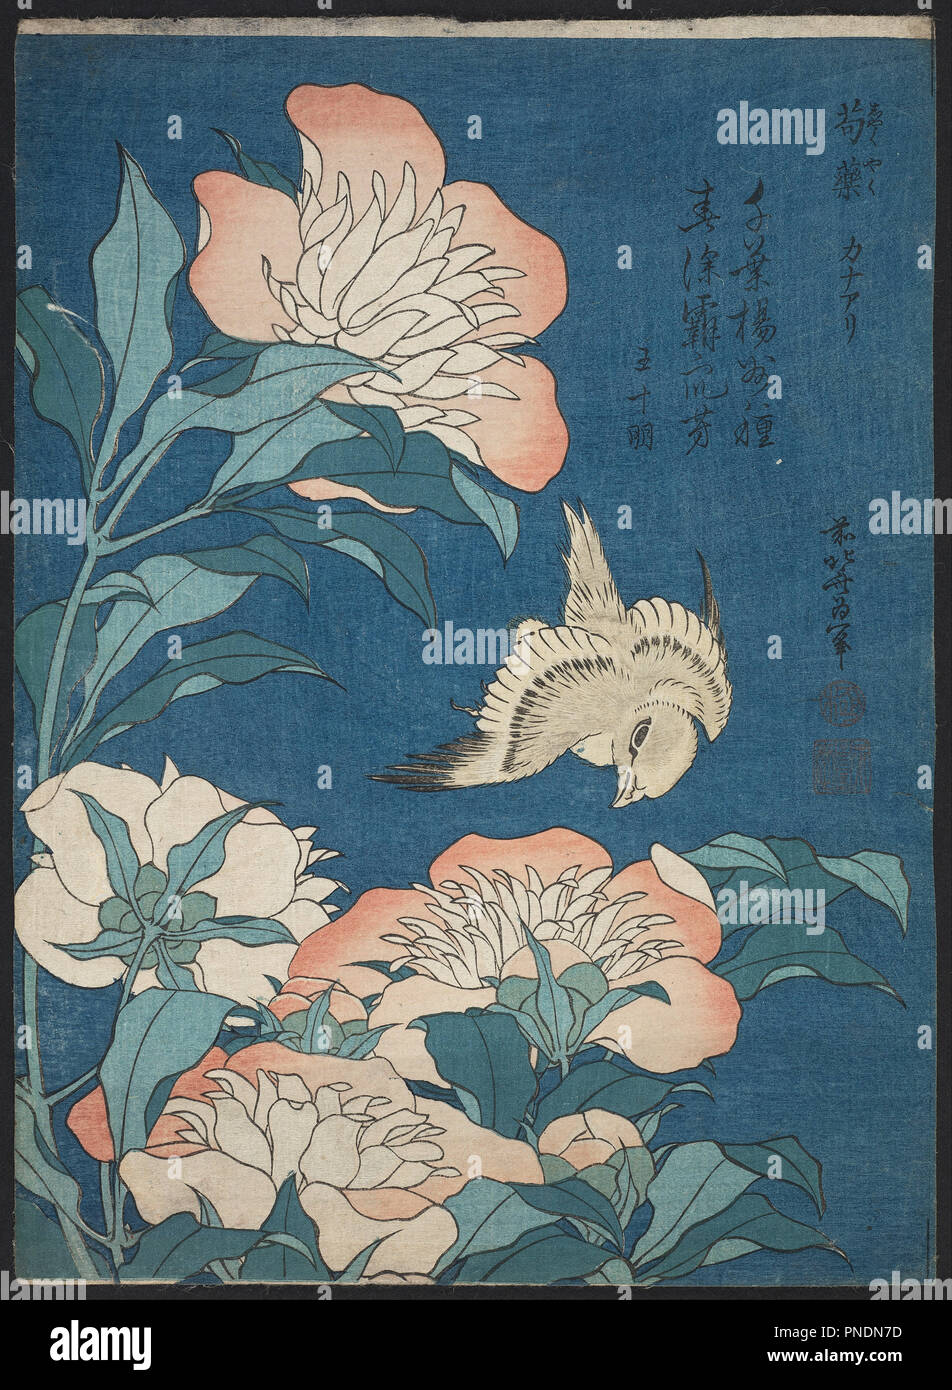 Peonies and Canary (Shakuyaku, kanaari), from an untitled series known as Small Flowers. Date/Period: Ca. 1834 (Tenpo 5). Print. Woodblock print (nishiki-e); ink and color on paper. Height: 259 mm (10.19 in); Width: 190 mm (7.48 in). Author: HOKUSAI, KATSUSHIKA. Stock Photo